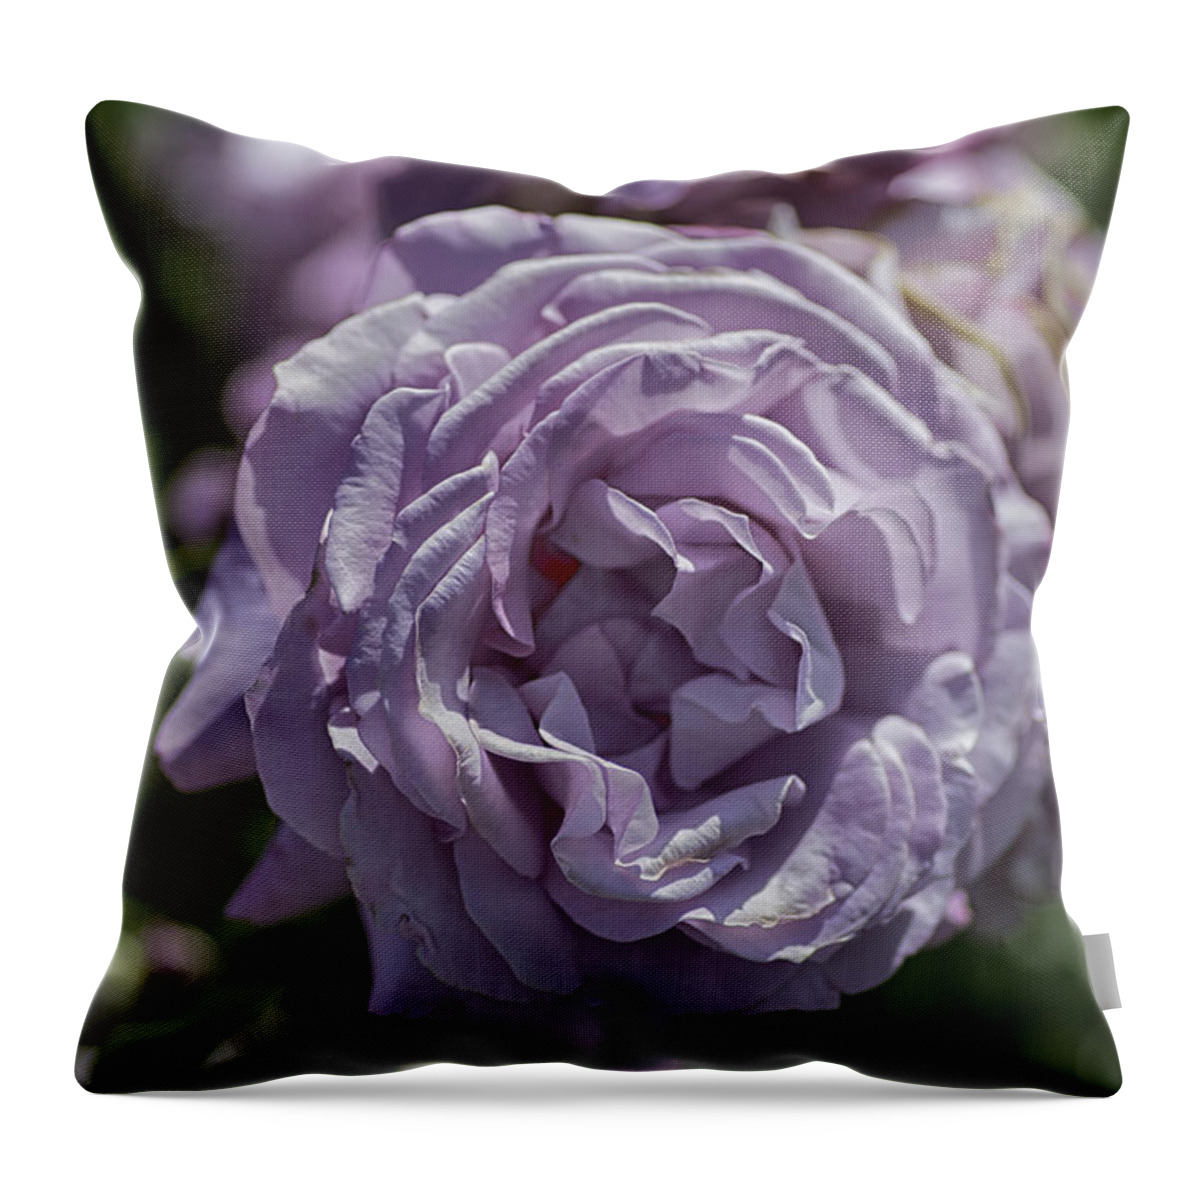 Rose Throw Pillow featuring the photograph Purple Rose by Patricia Dennis